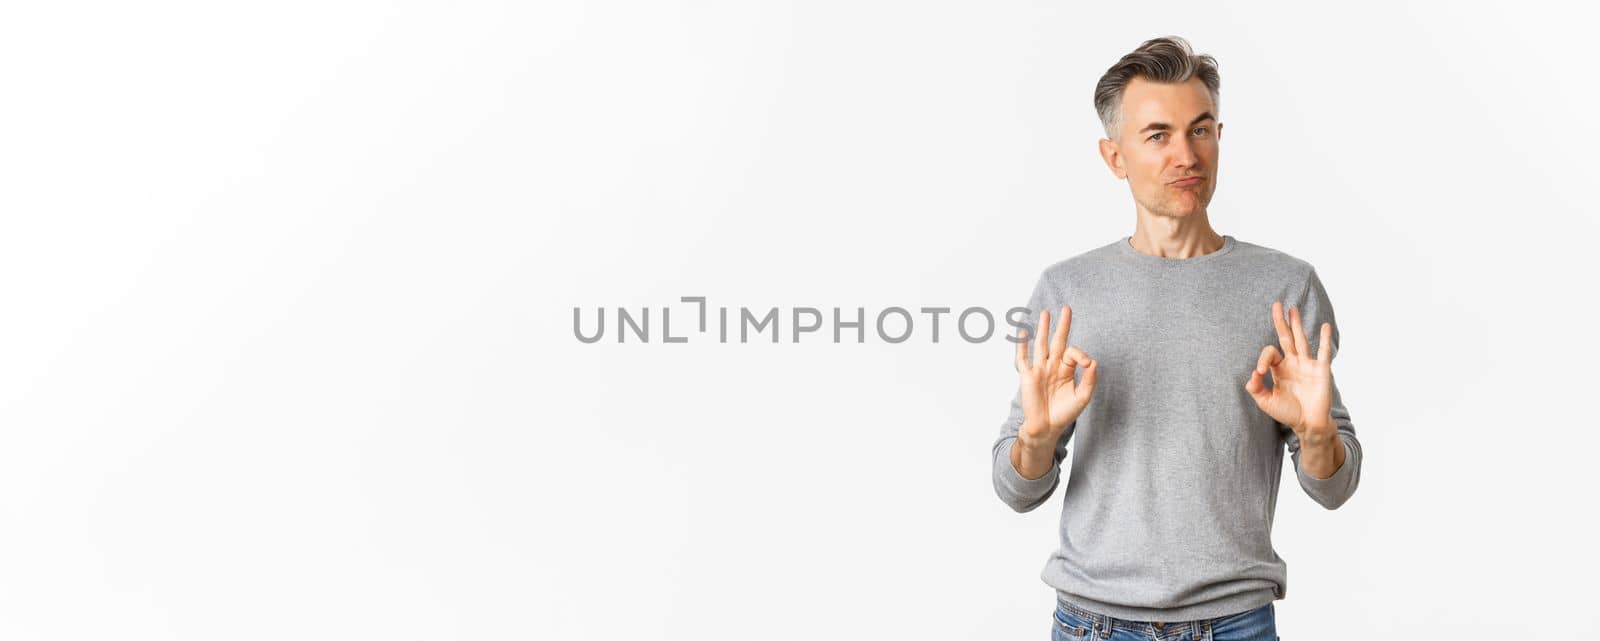 Image of impressed and satisfied middle-aged man, showing okay signs and nodding in approval, praise good choice, standing over white background.